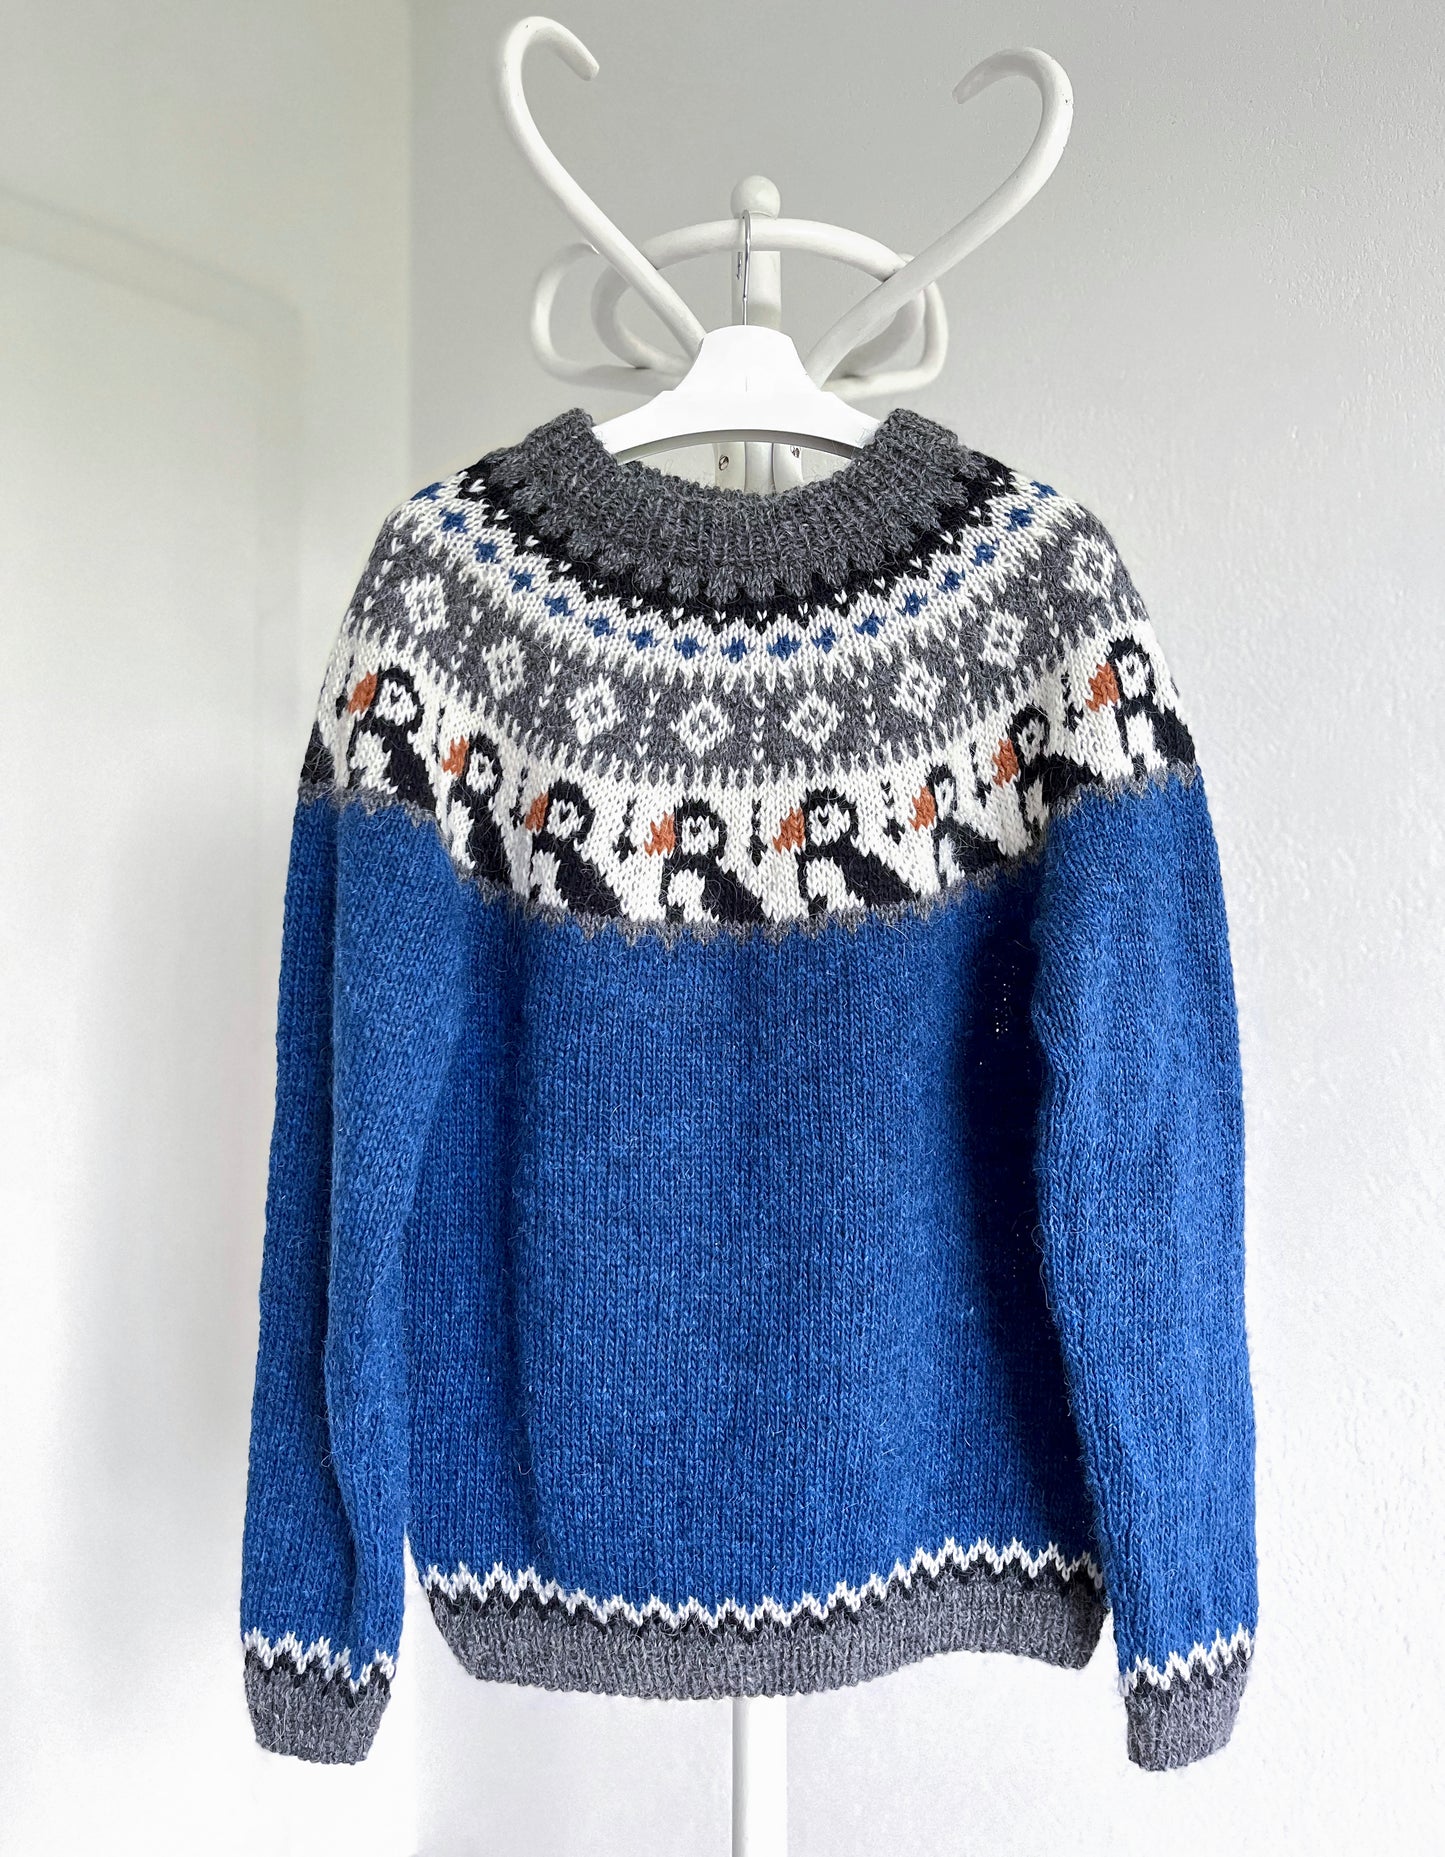 Blue, grey and white knitted Icelandic lopapeysa sweater in Puffins knitting pattern